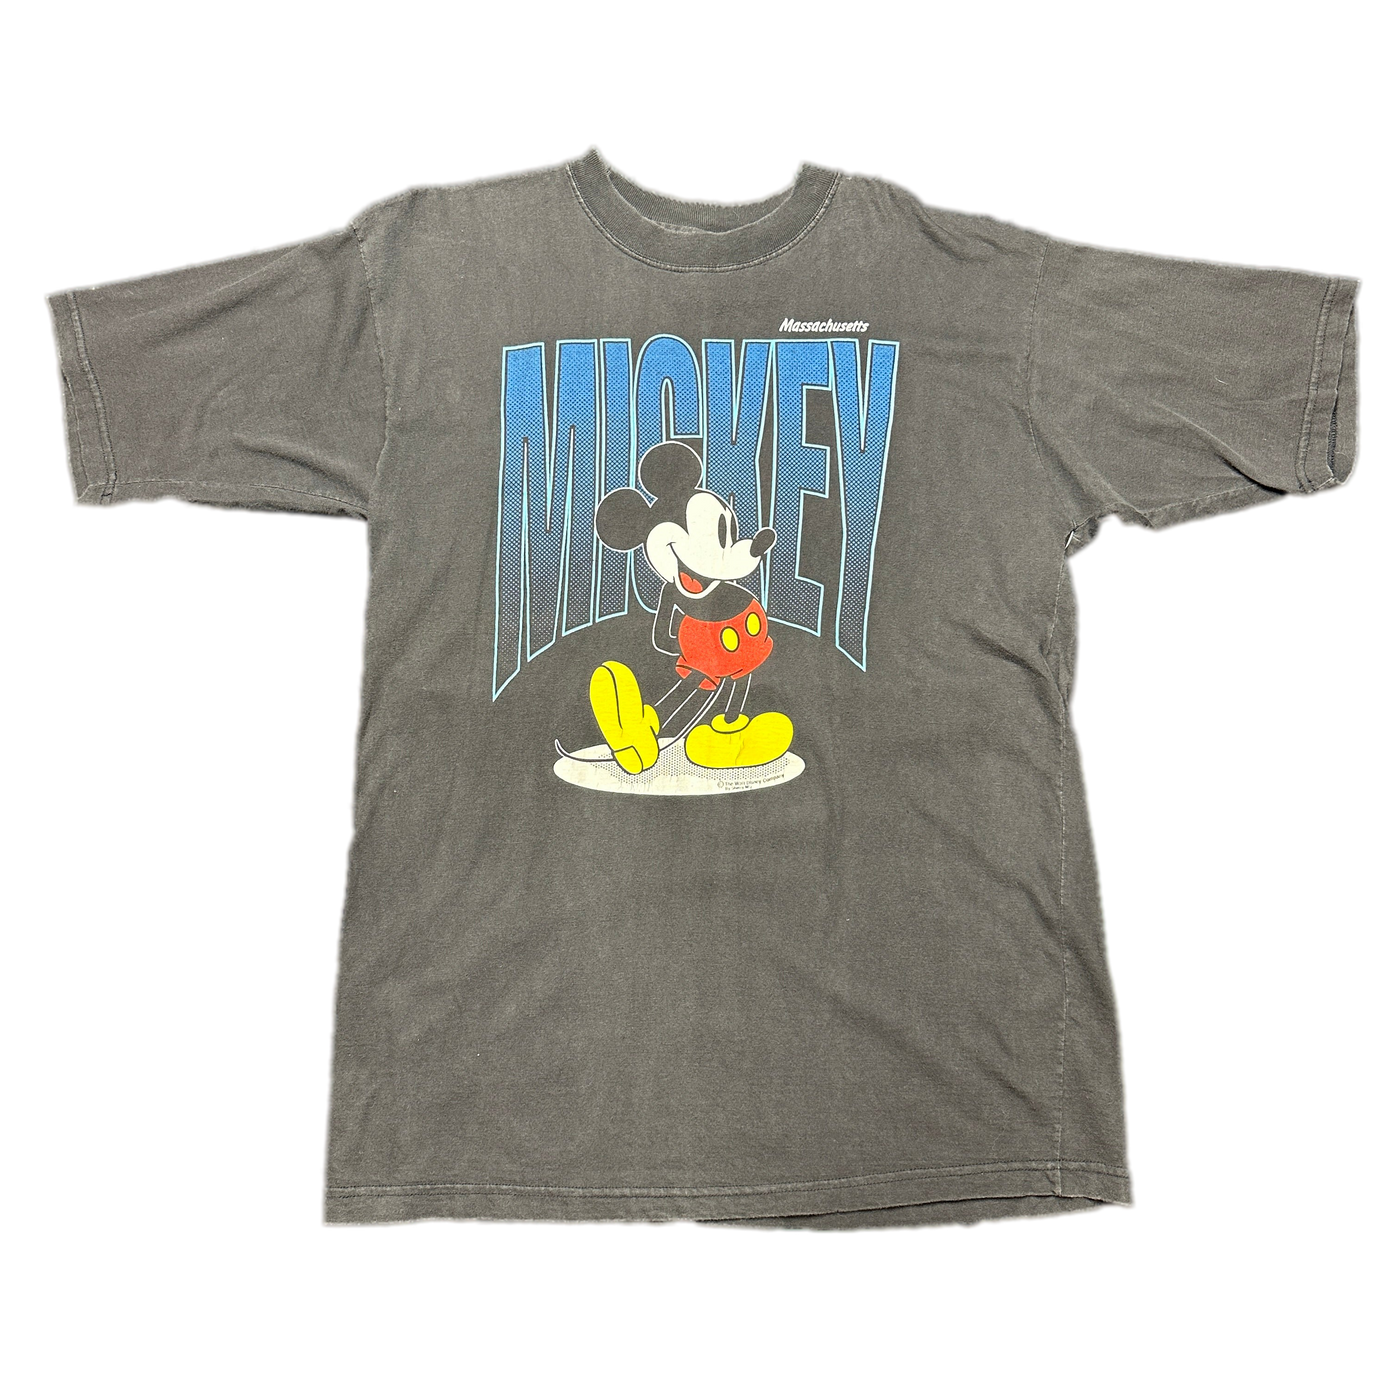 90's Mickey Mouse On Stage T-shirt sz XL